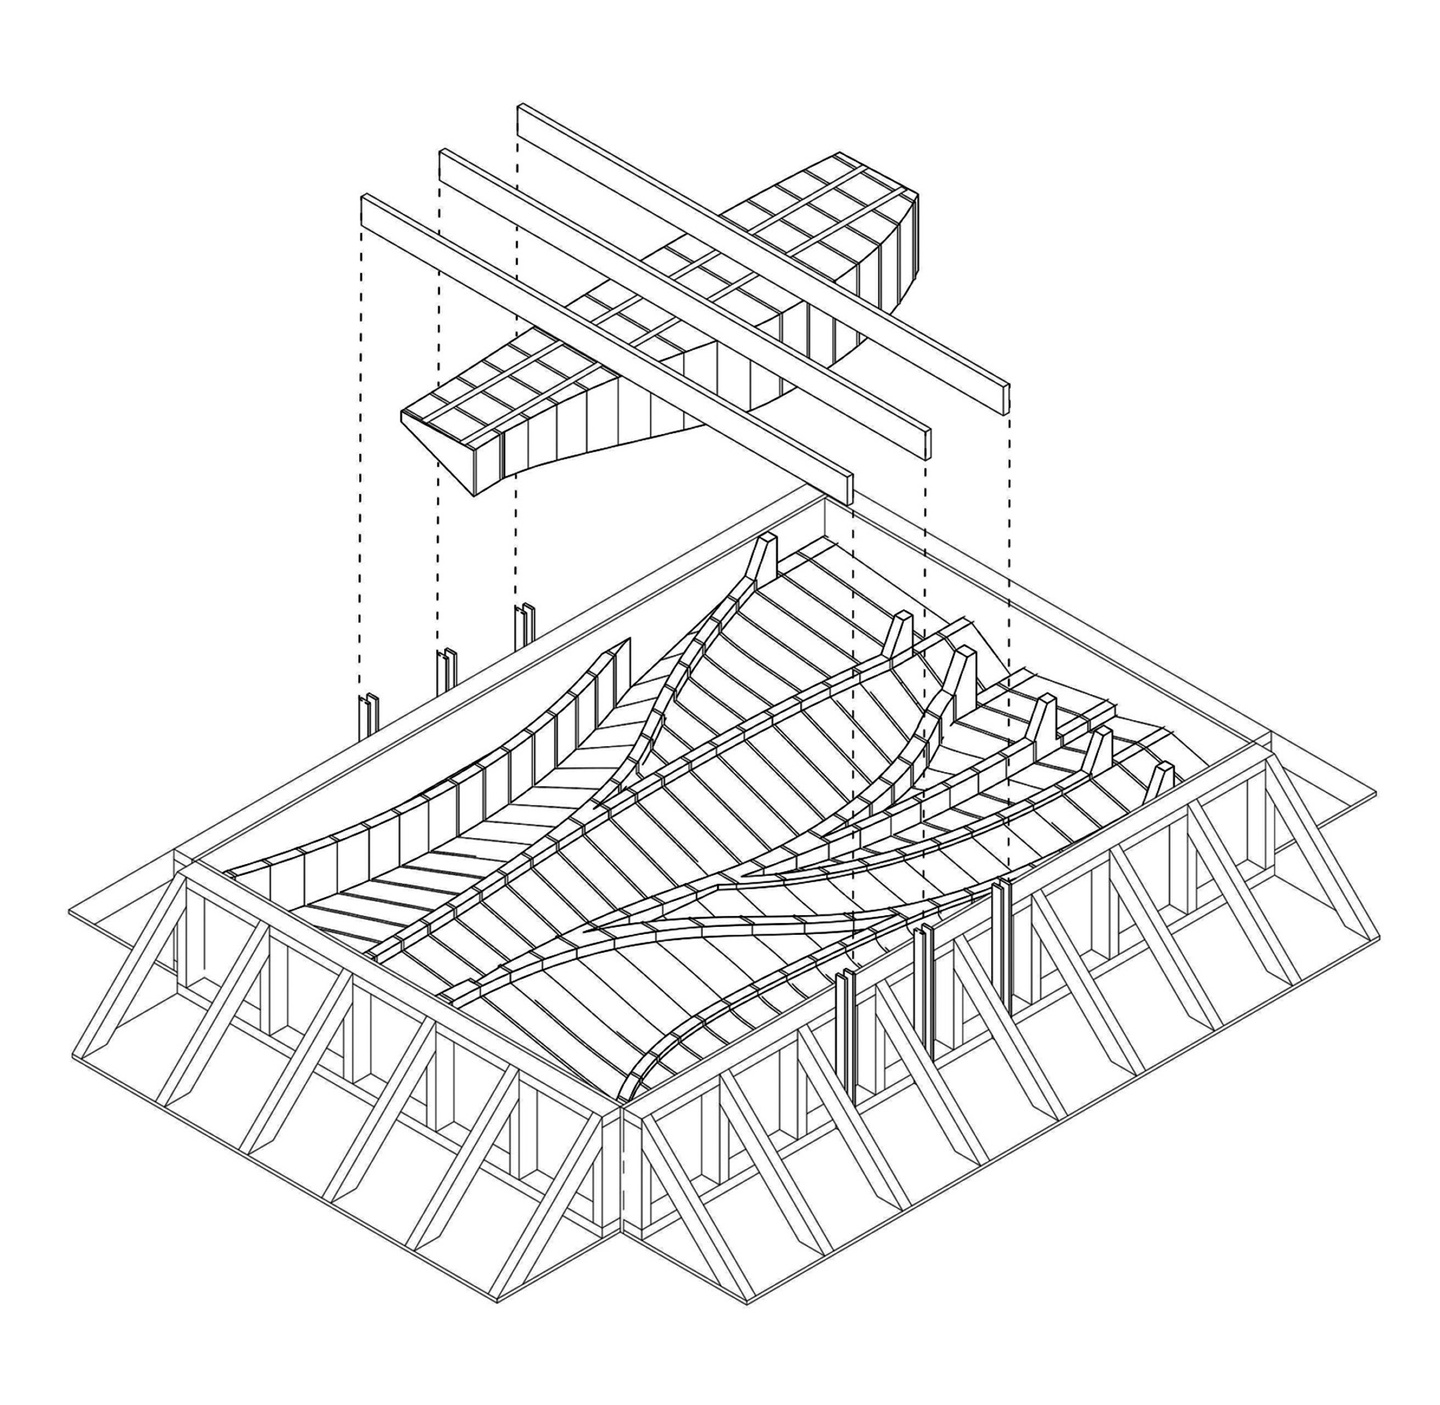 Architectural wireframe rendering of a concrete prototype wave-like structure